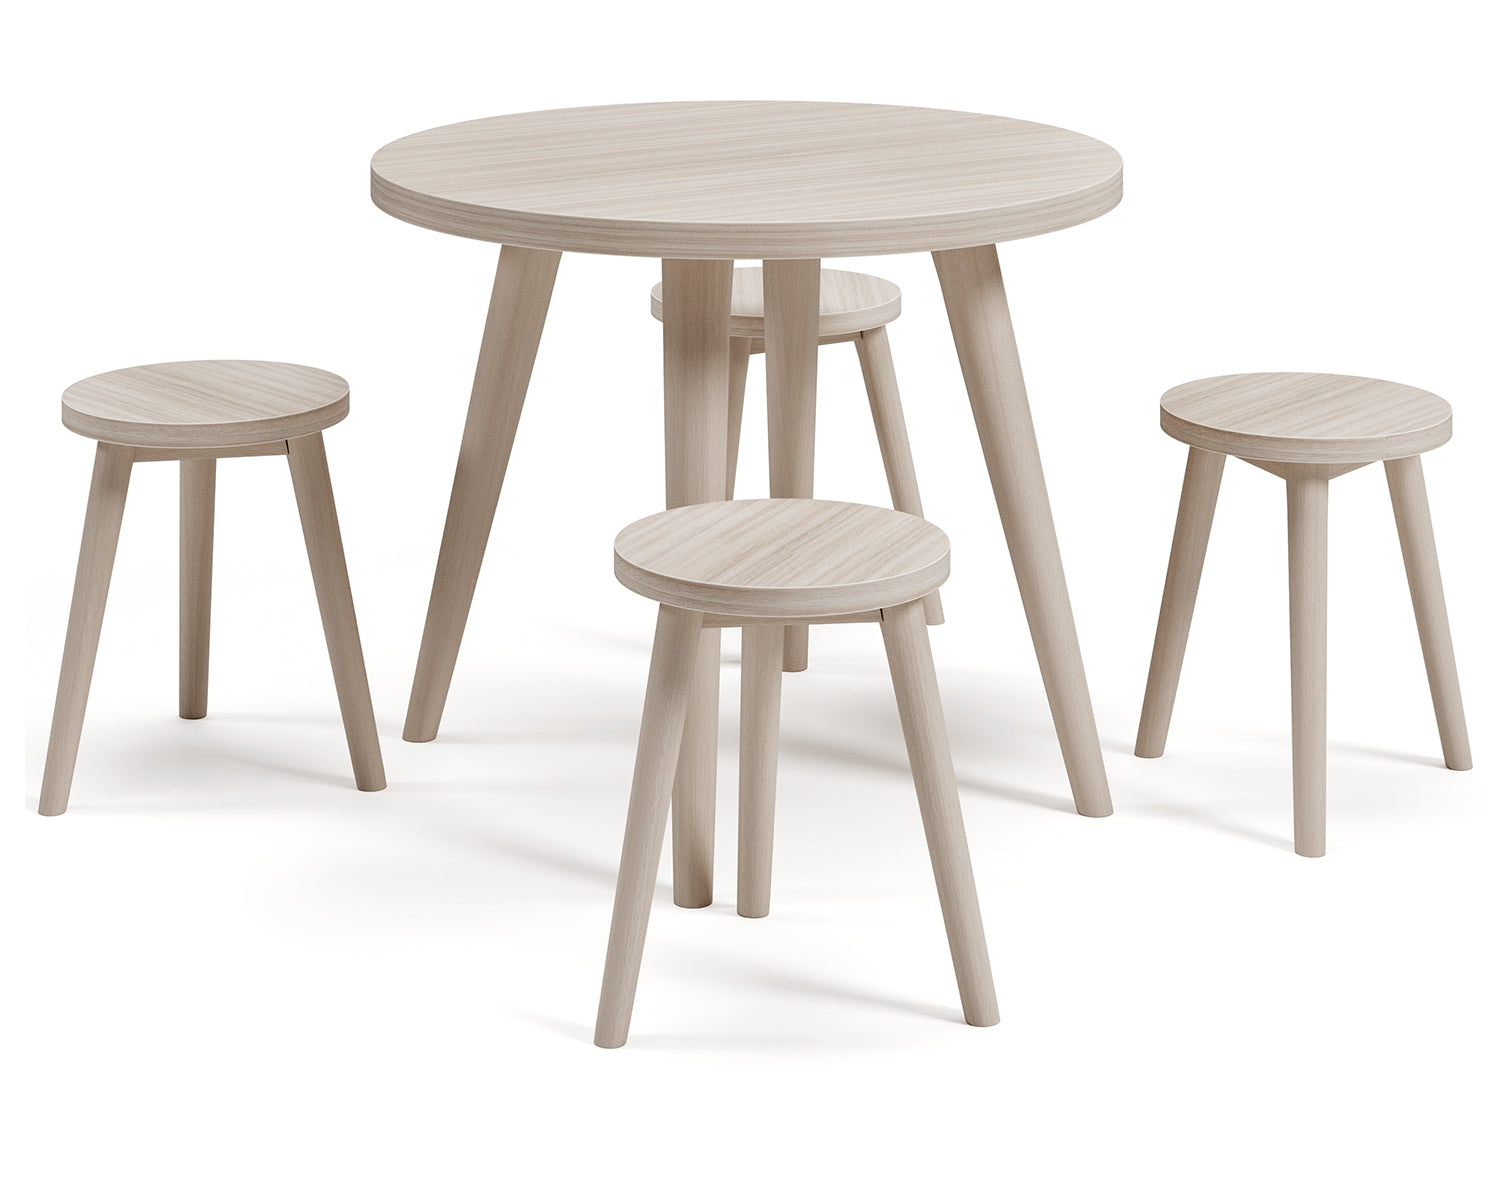 Blariden Table and Chairs (Set of 5)